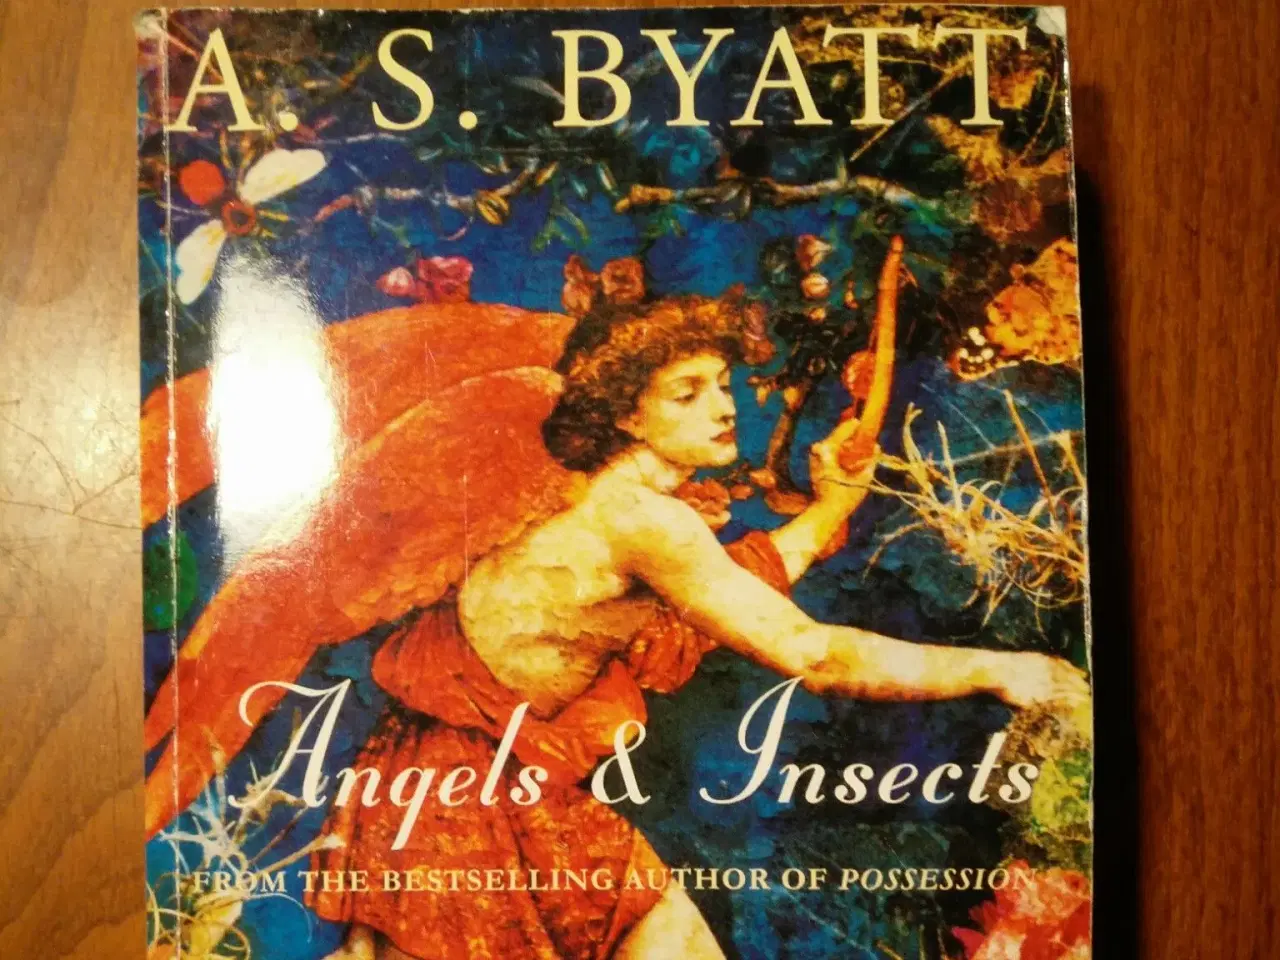 Billede 1 - Angels and Insects af A.S. Byatt